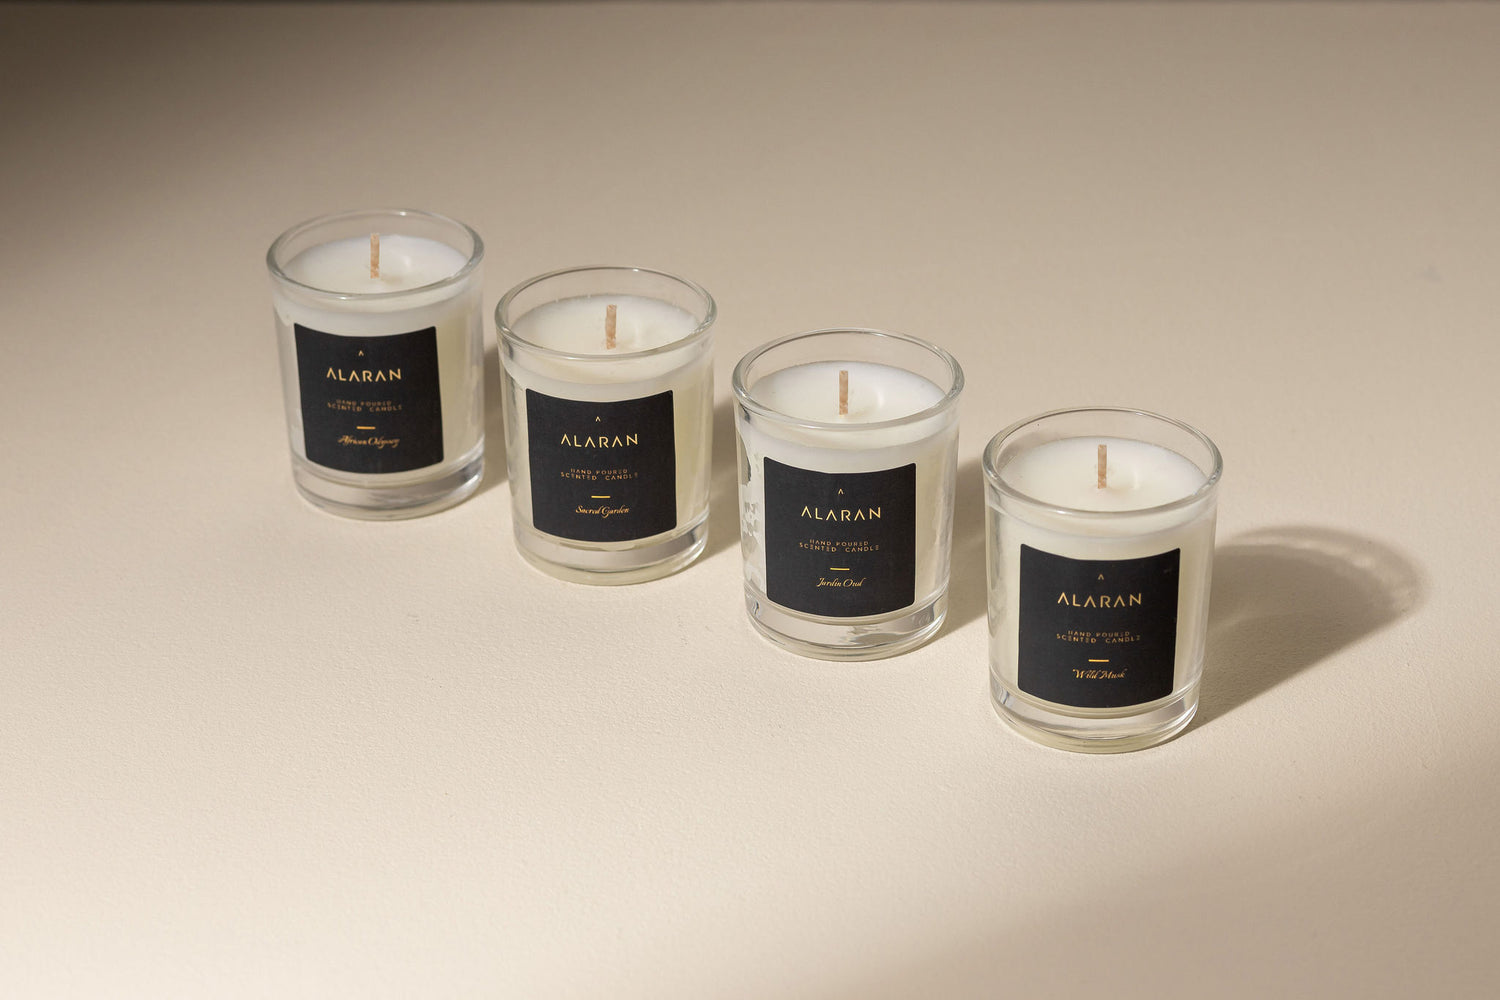 ALARAN Discovery Set candles on a neutral background